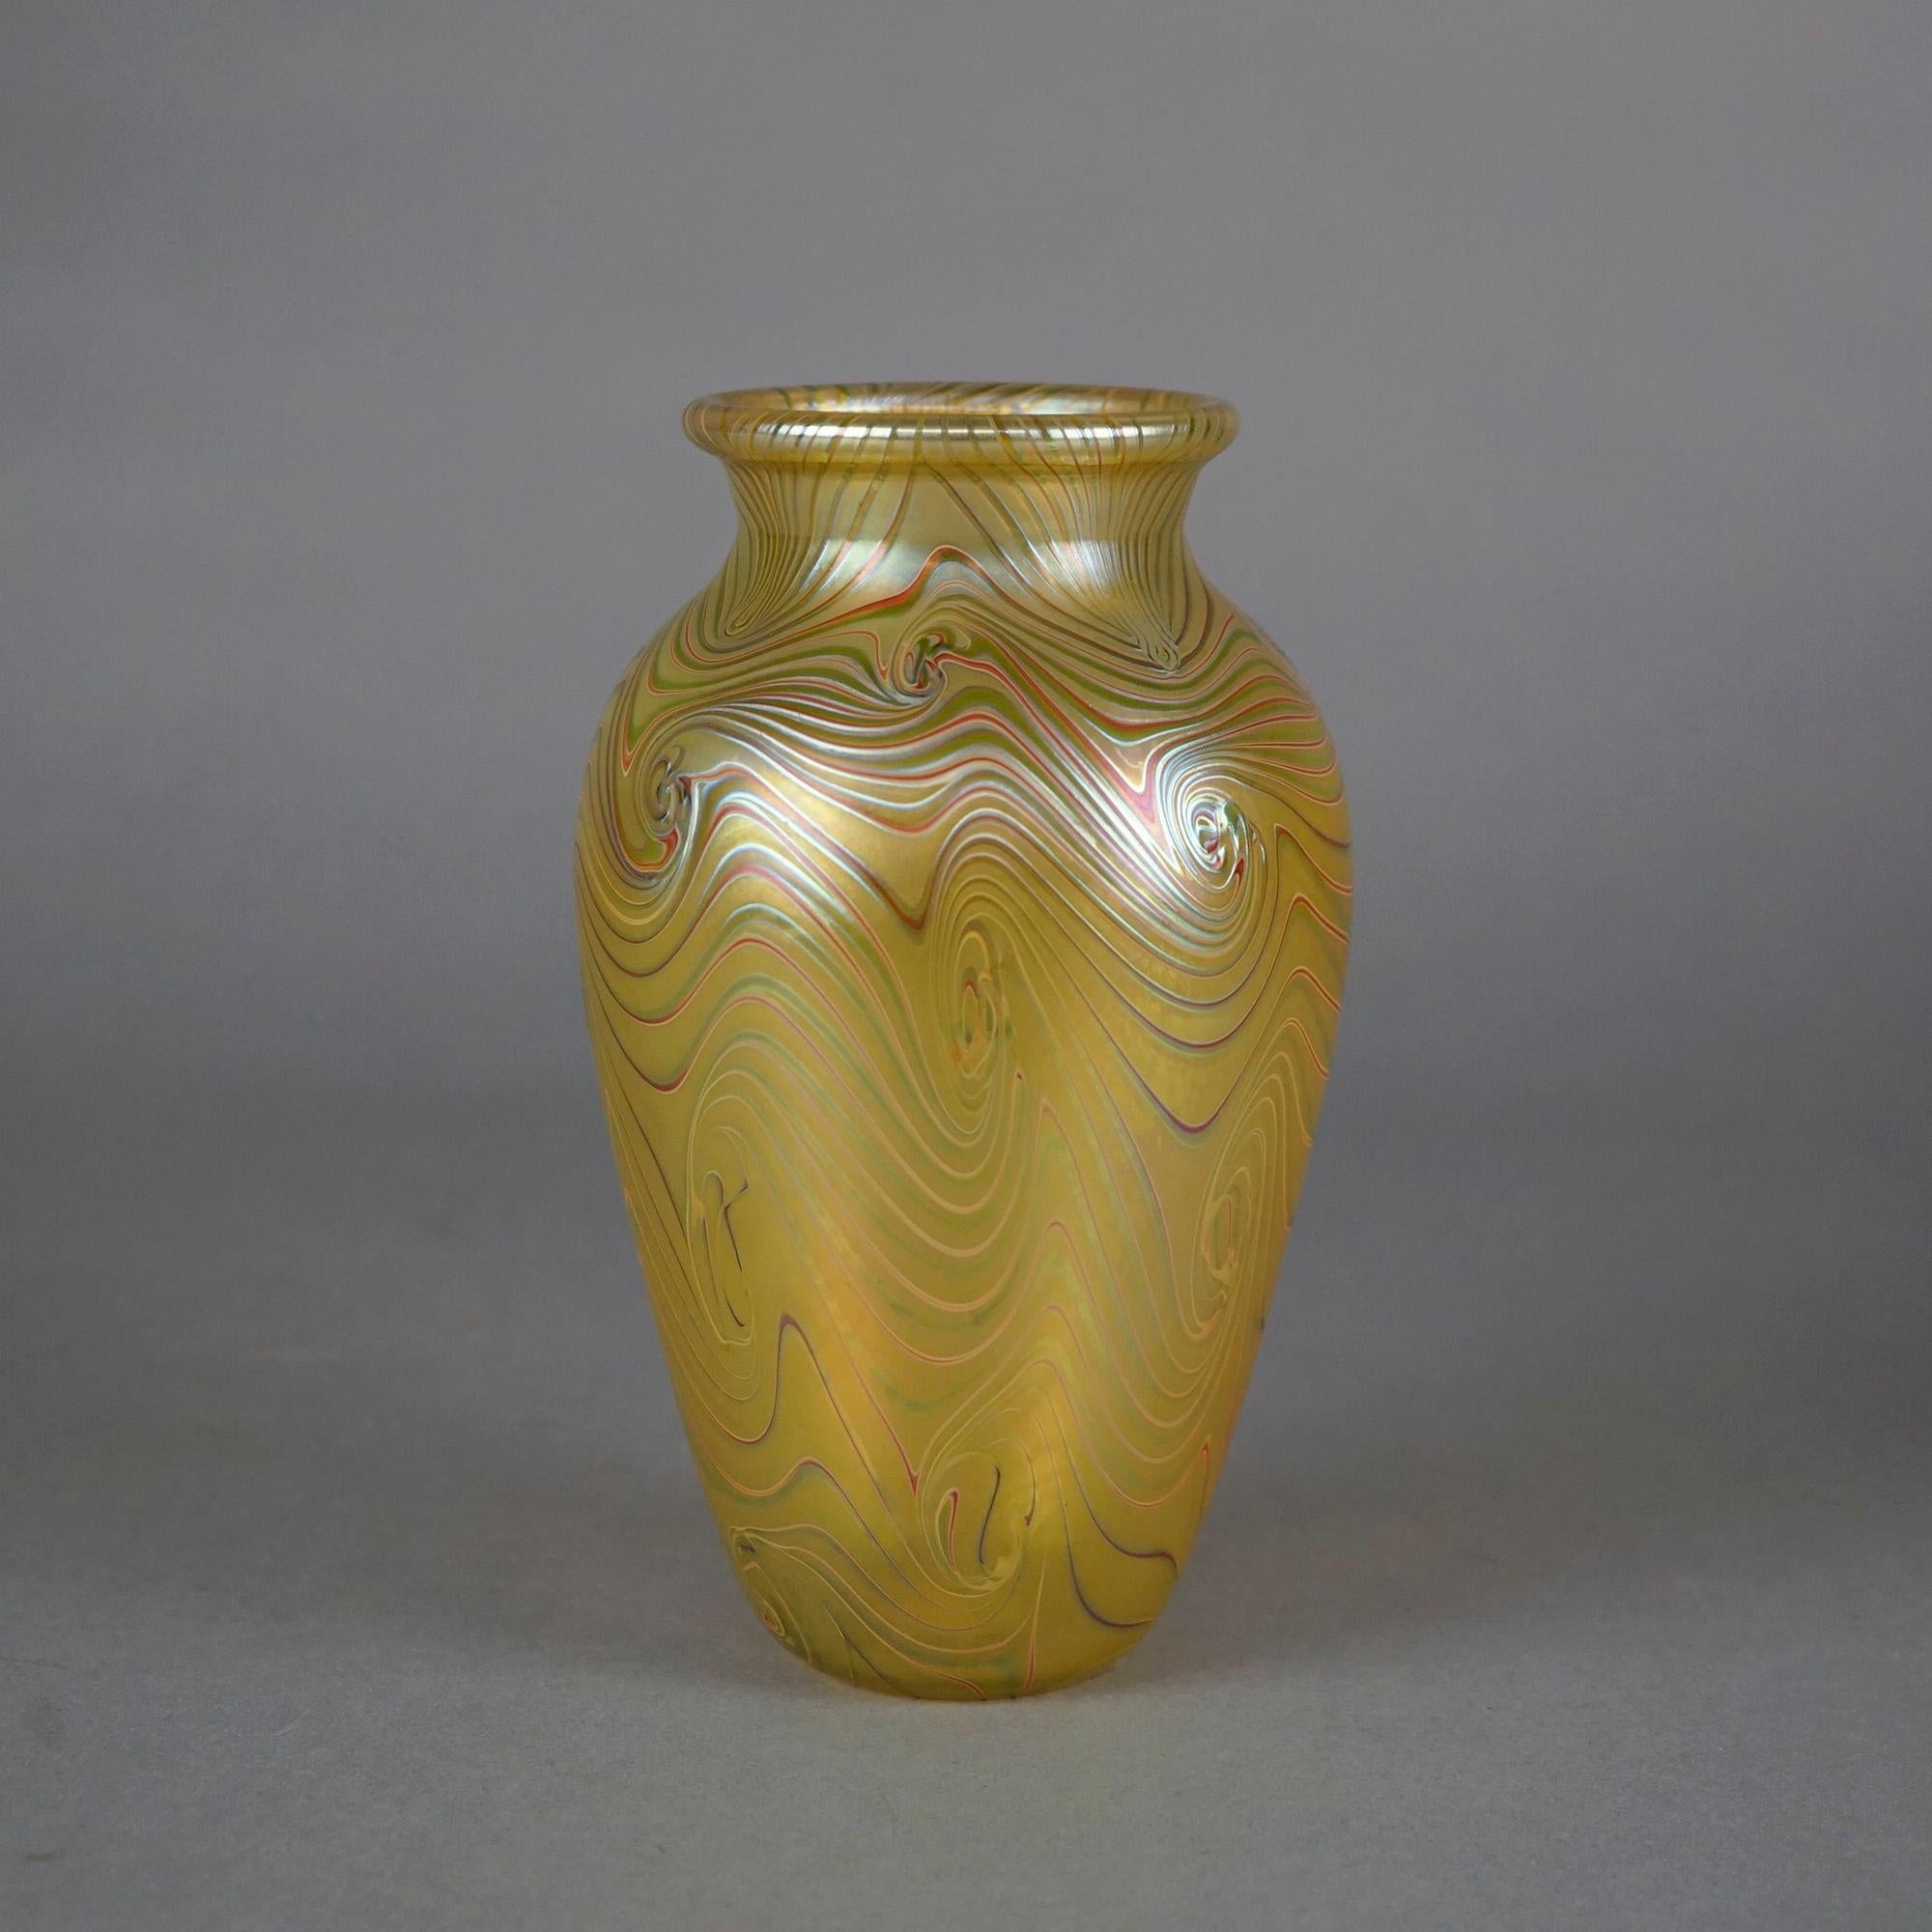 An artisan crafted vase by Orient and Flume offers art glass construction with chocolate swirls on gold ground, original label and dated as photographed, 20th century

Measures- 8'' H x 4.5'' W x 4.5'' D.